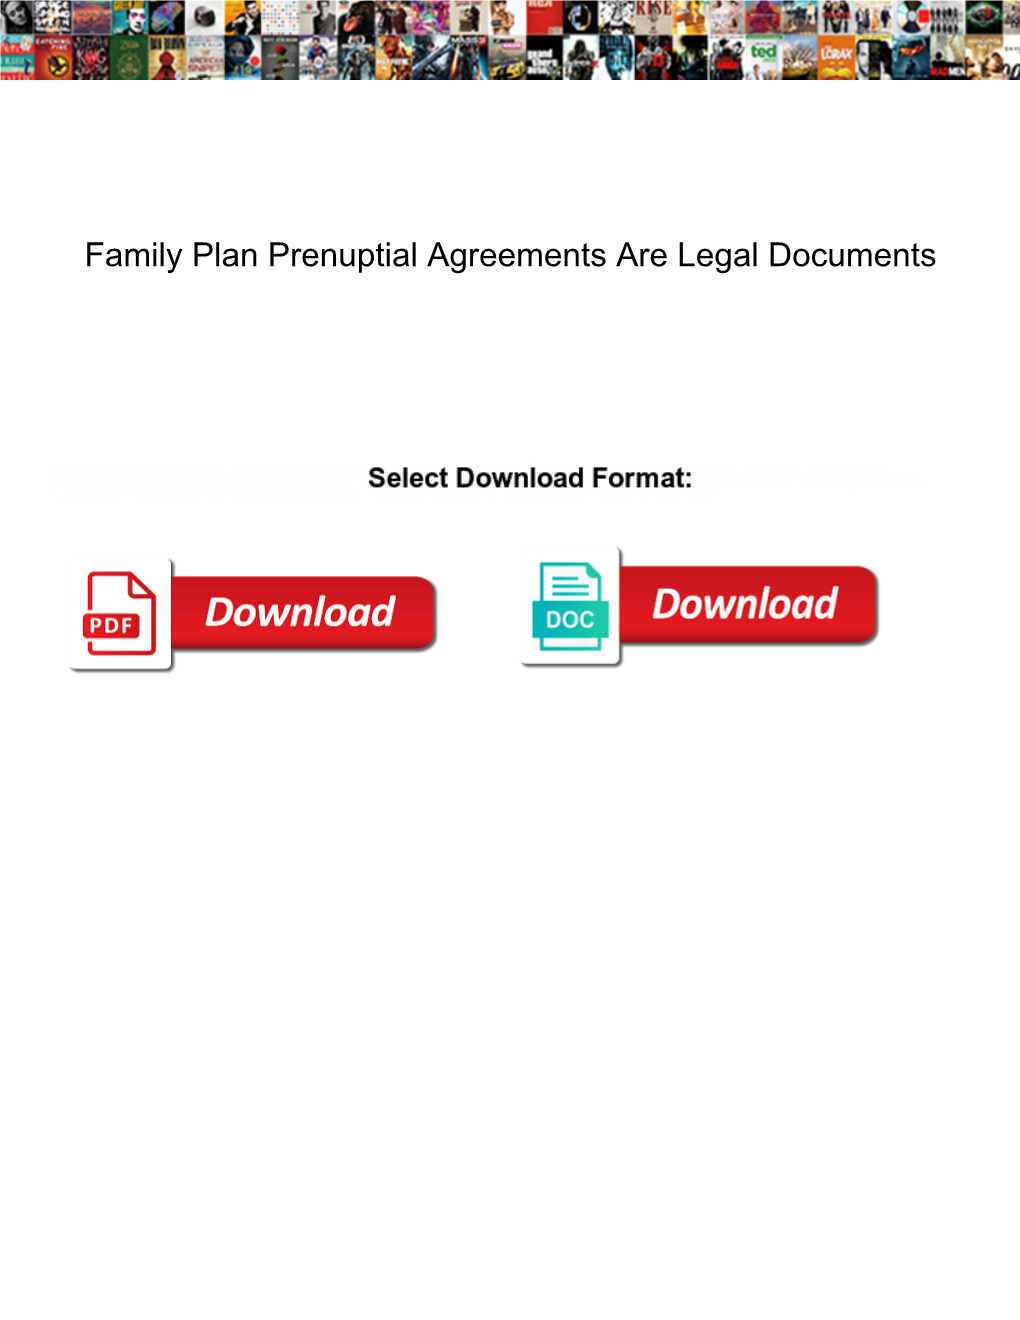 Family Plan Prenuptial Agreements Are Legal Documents